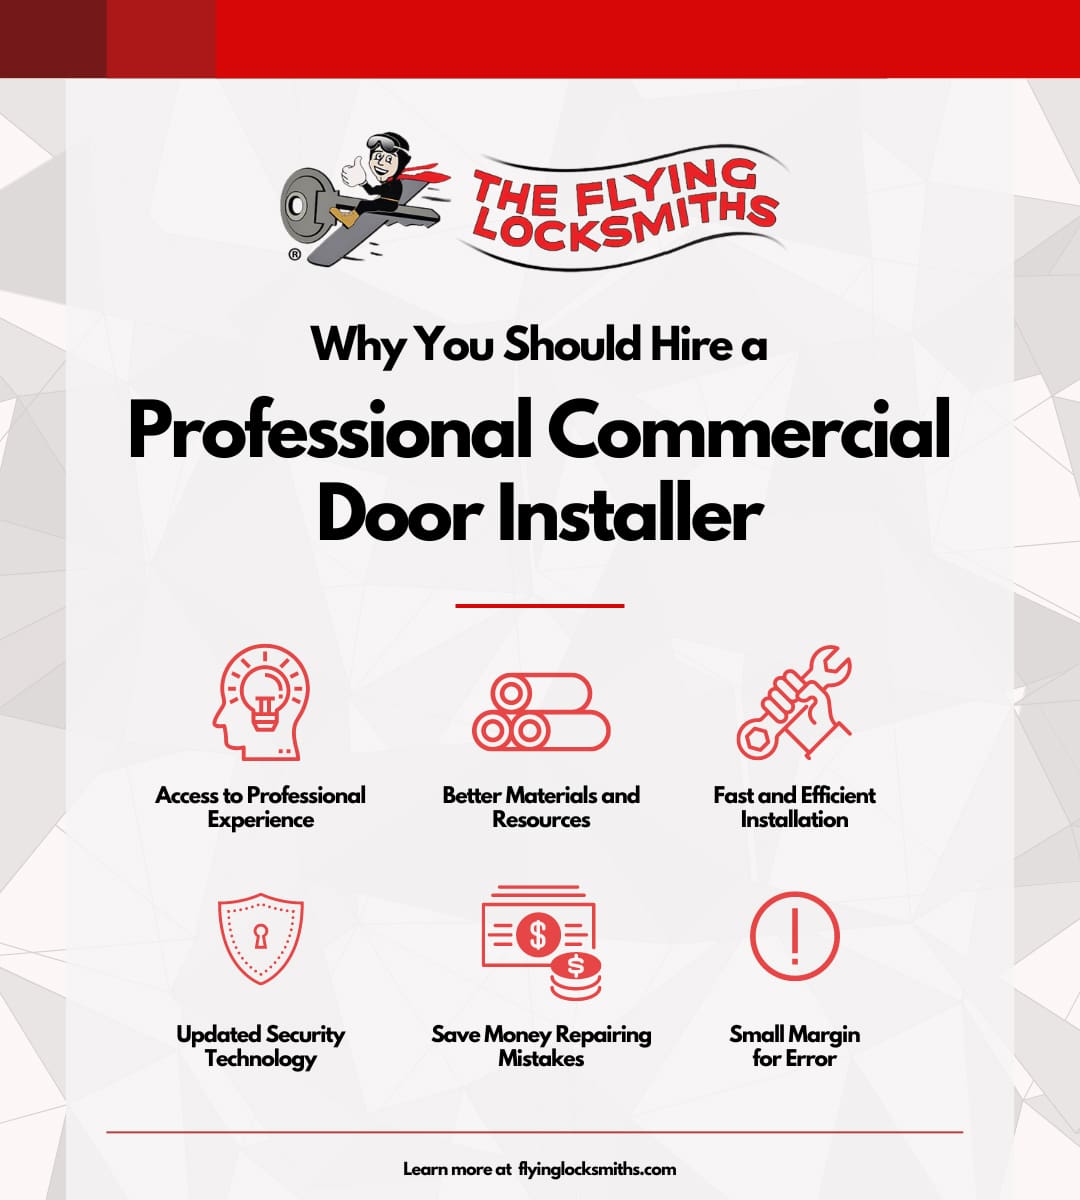 Why You Should Hire a Professional Commercial Door Installer